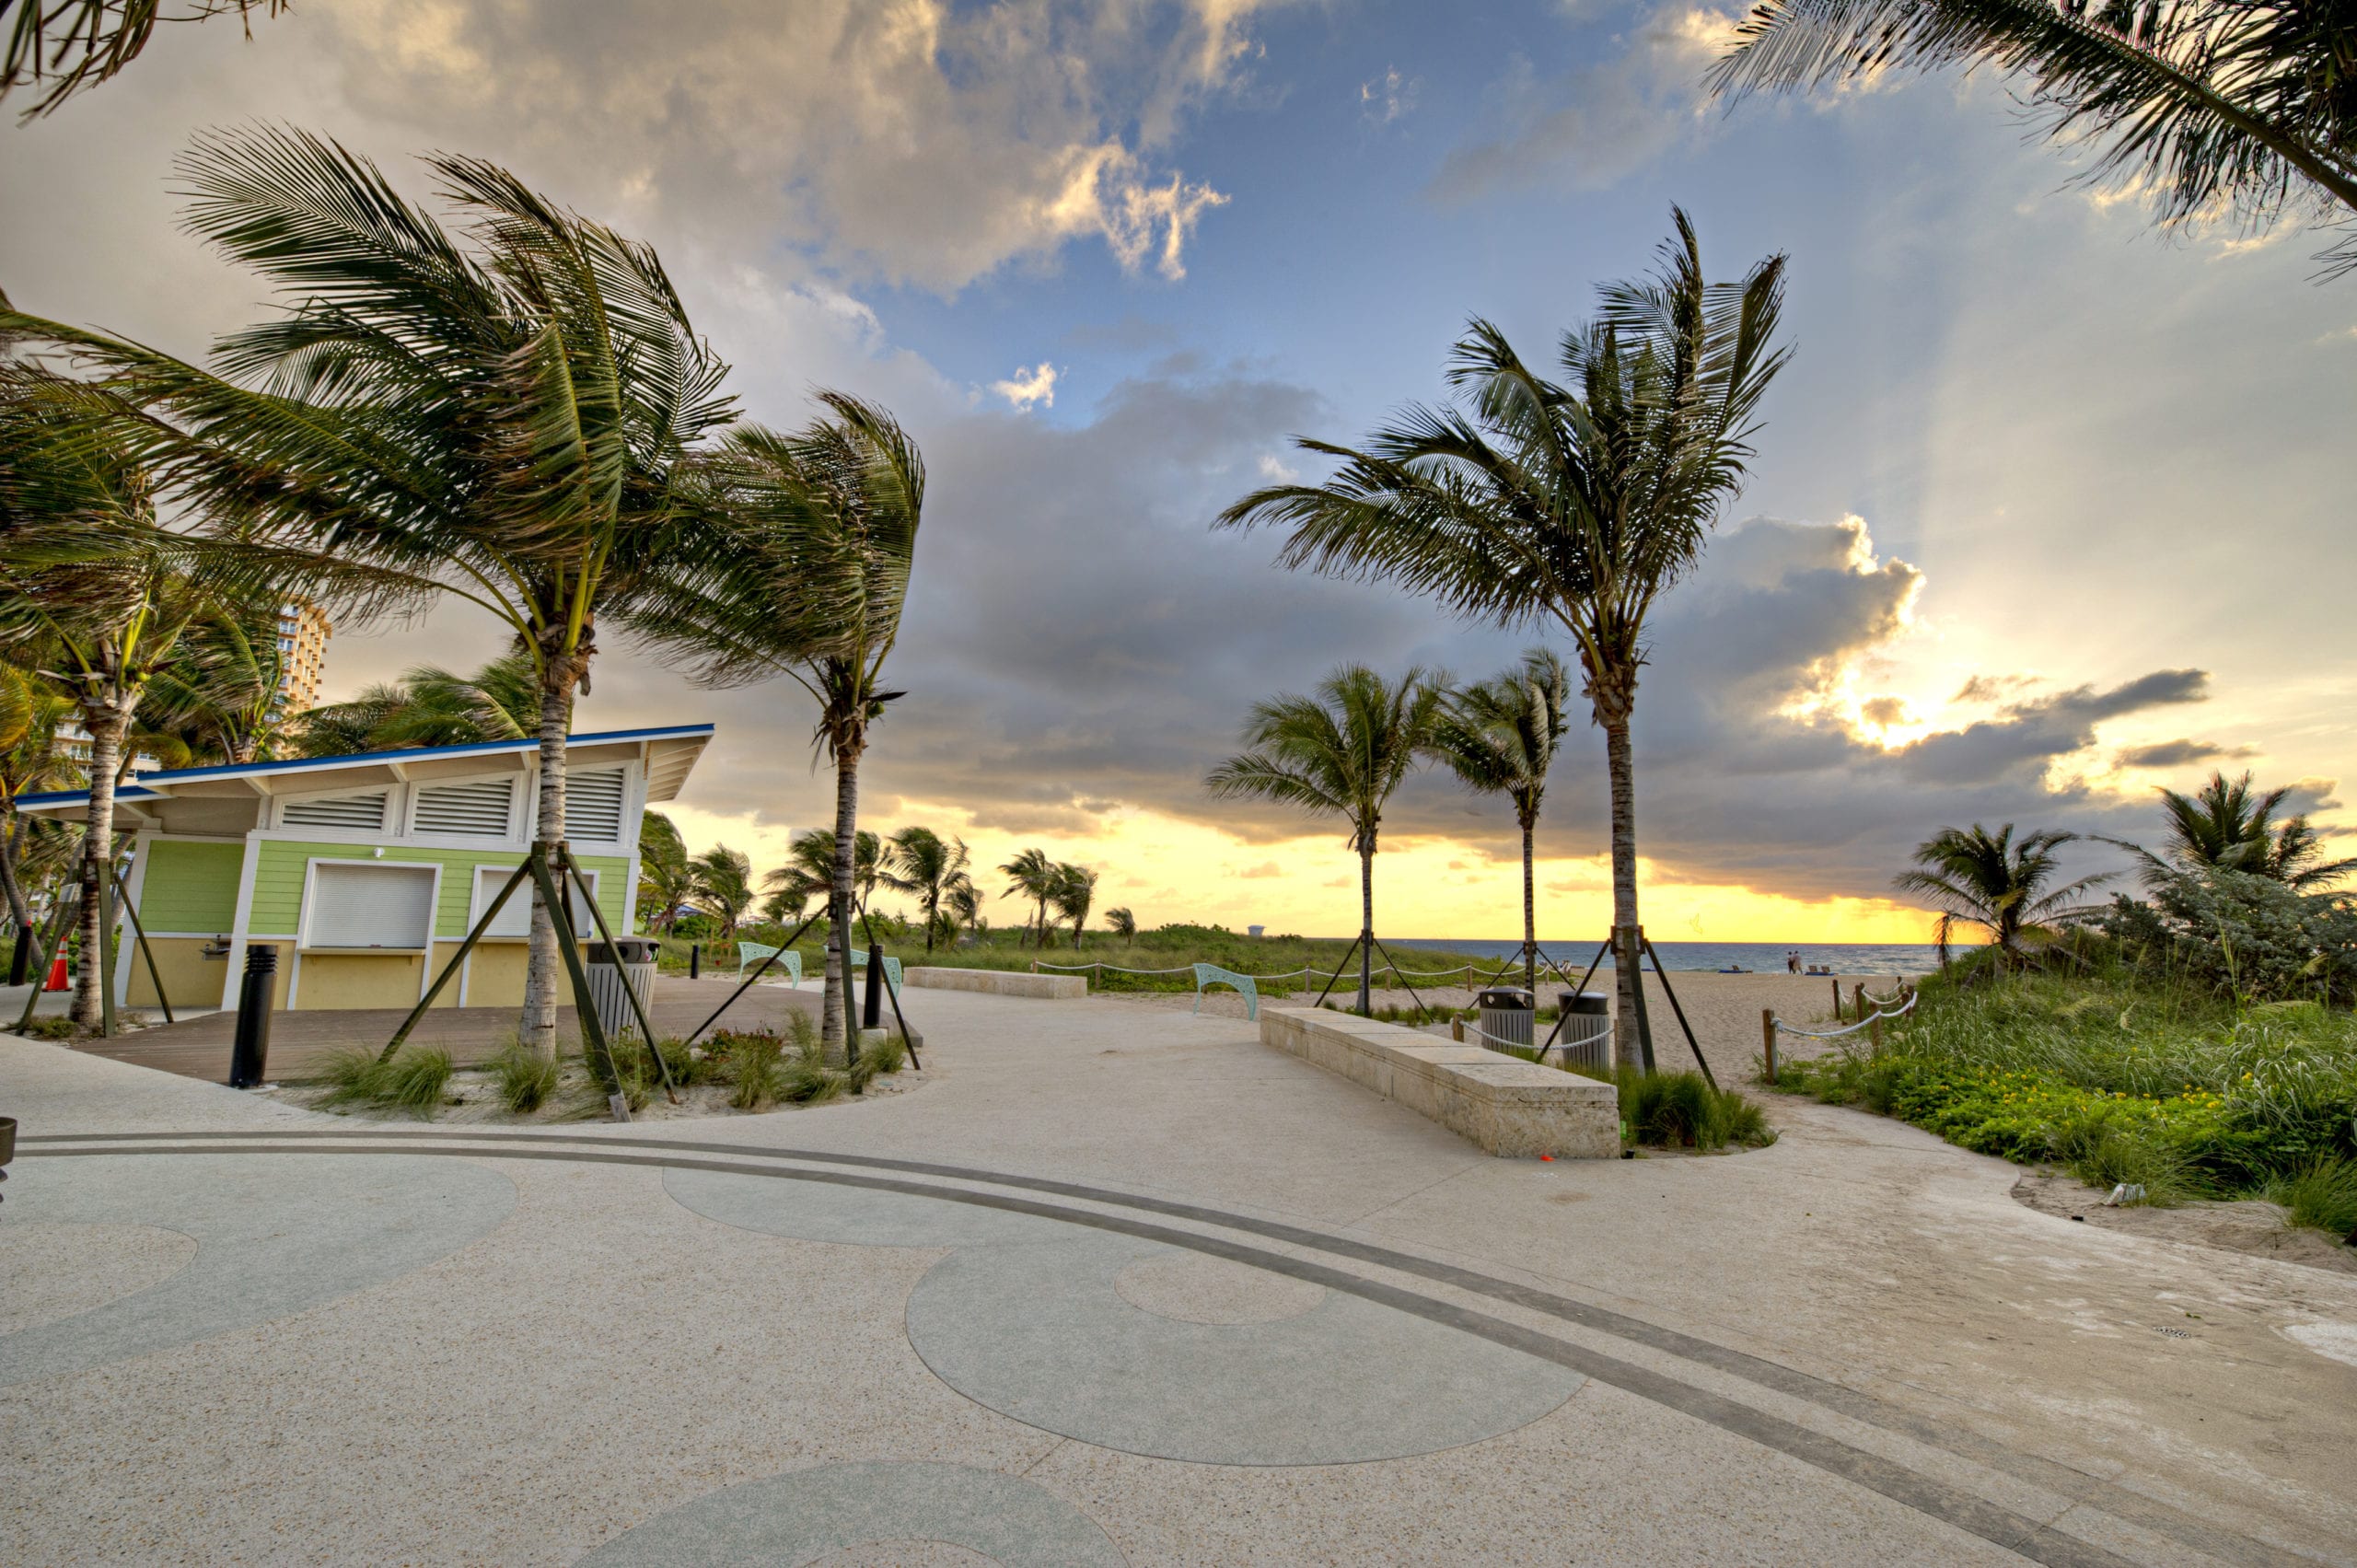 EDSA Pompano Beach Boulevard  Walkway with palm trees lining it with beach in the background